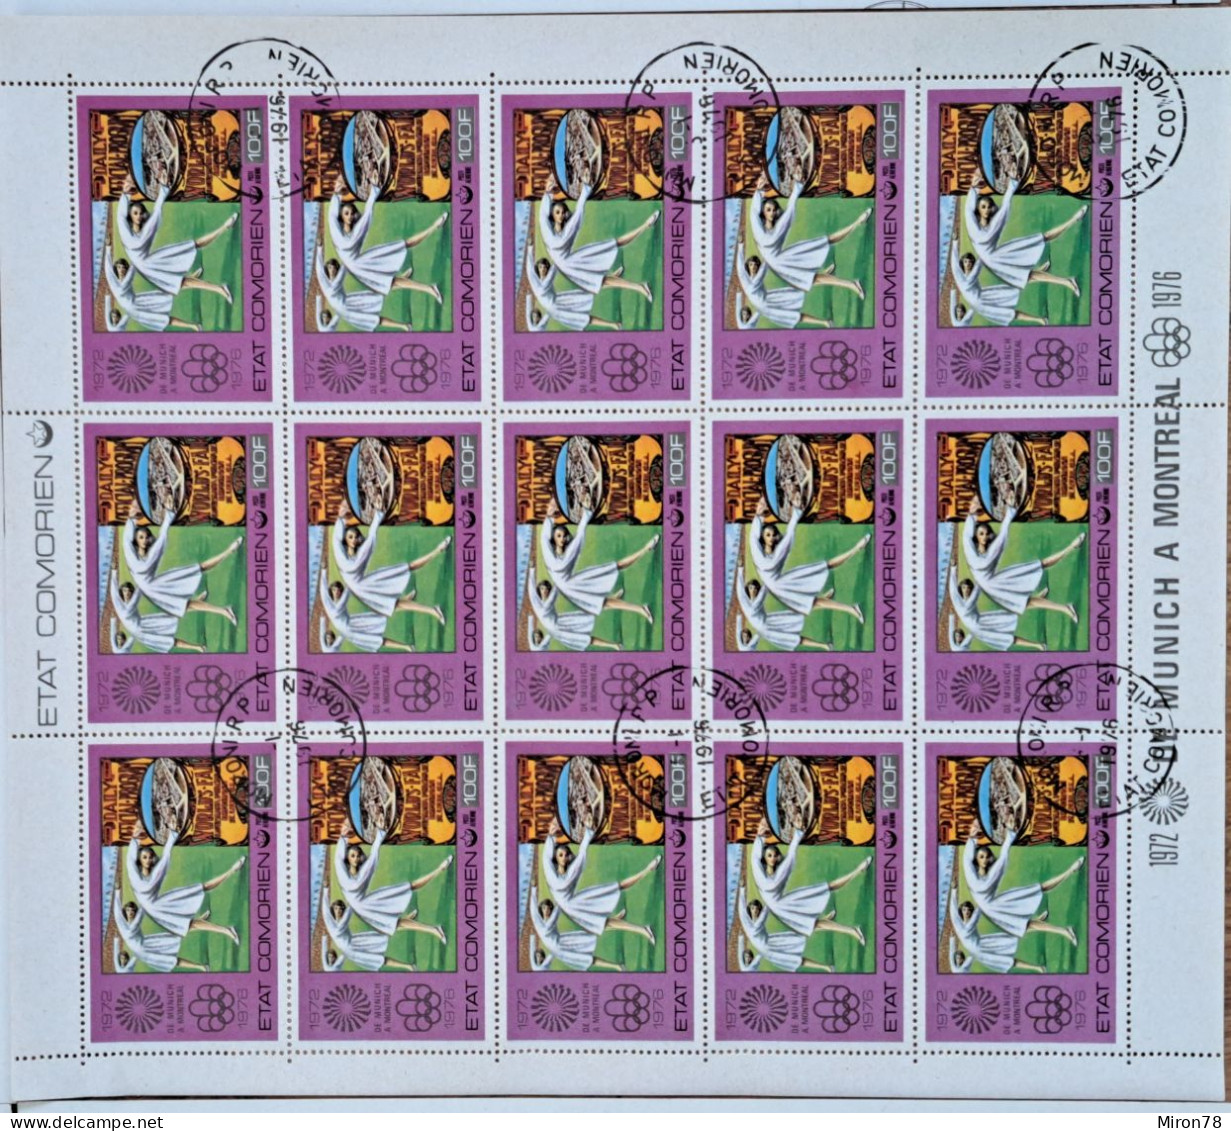 Comoros 1976 Mi. 275A-280A Mail Fresh 100% Airmail Olympic Games, Sport 15set used